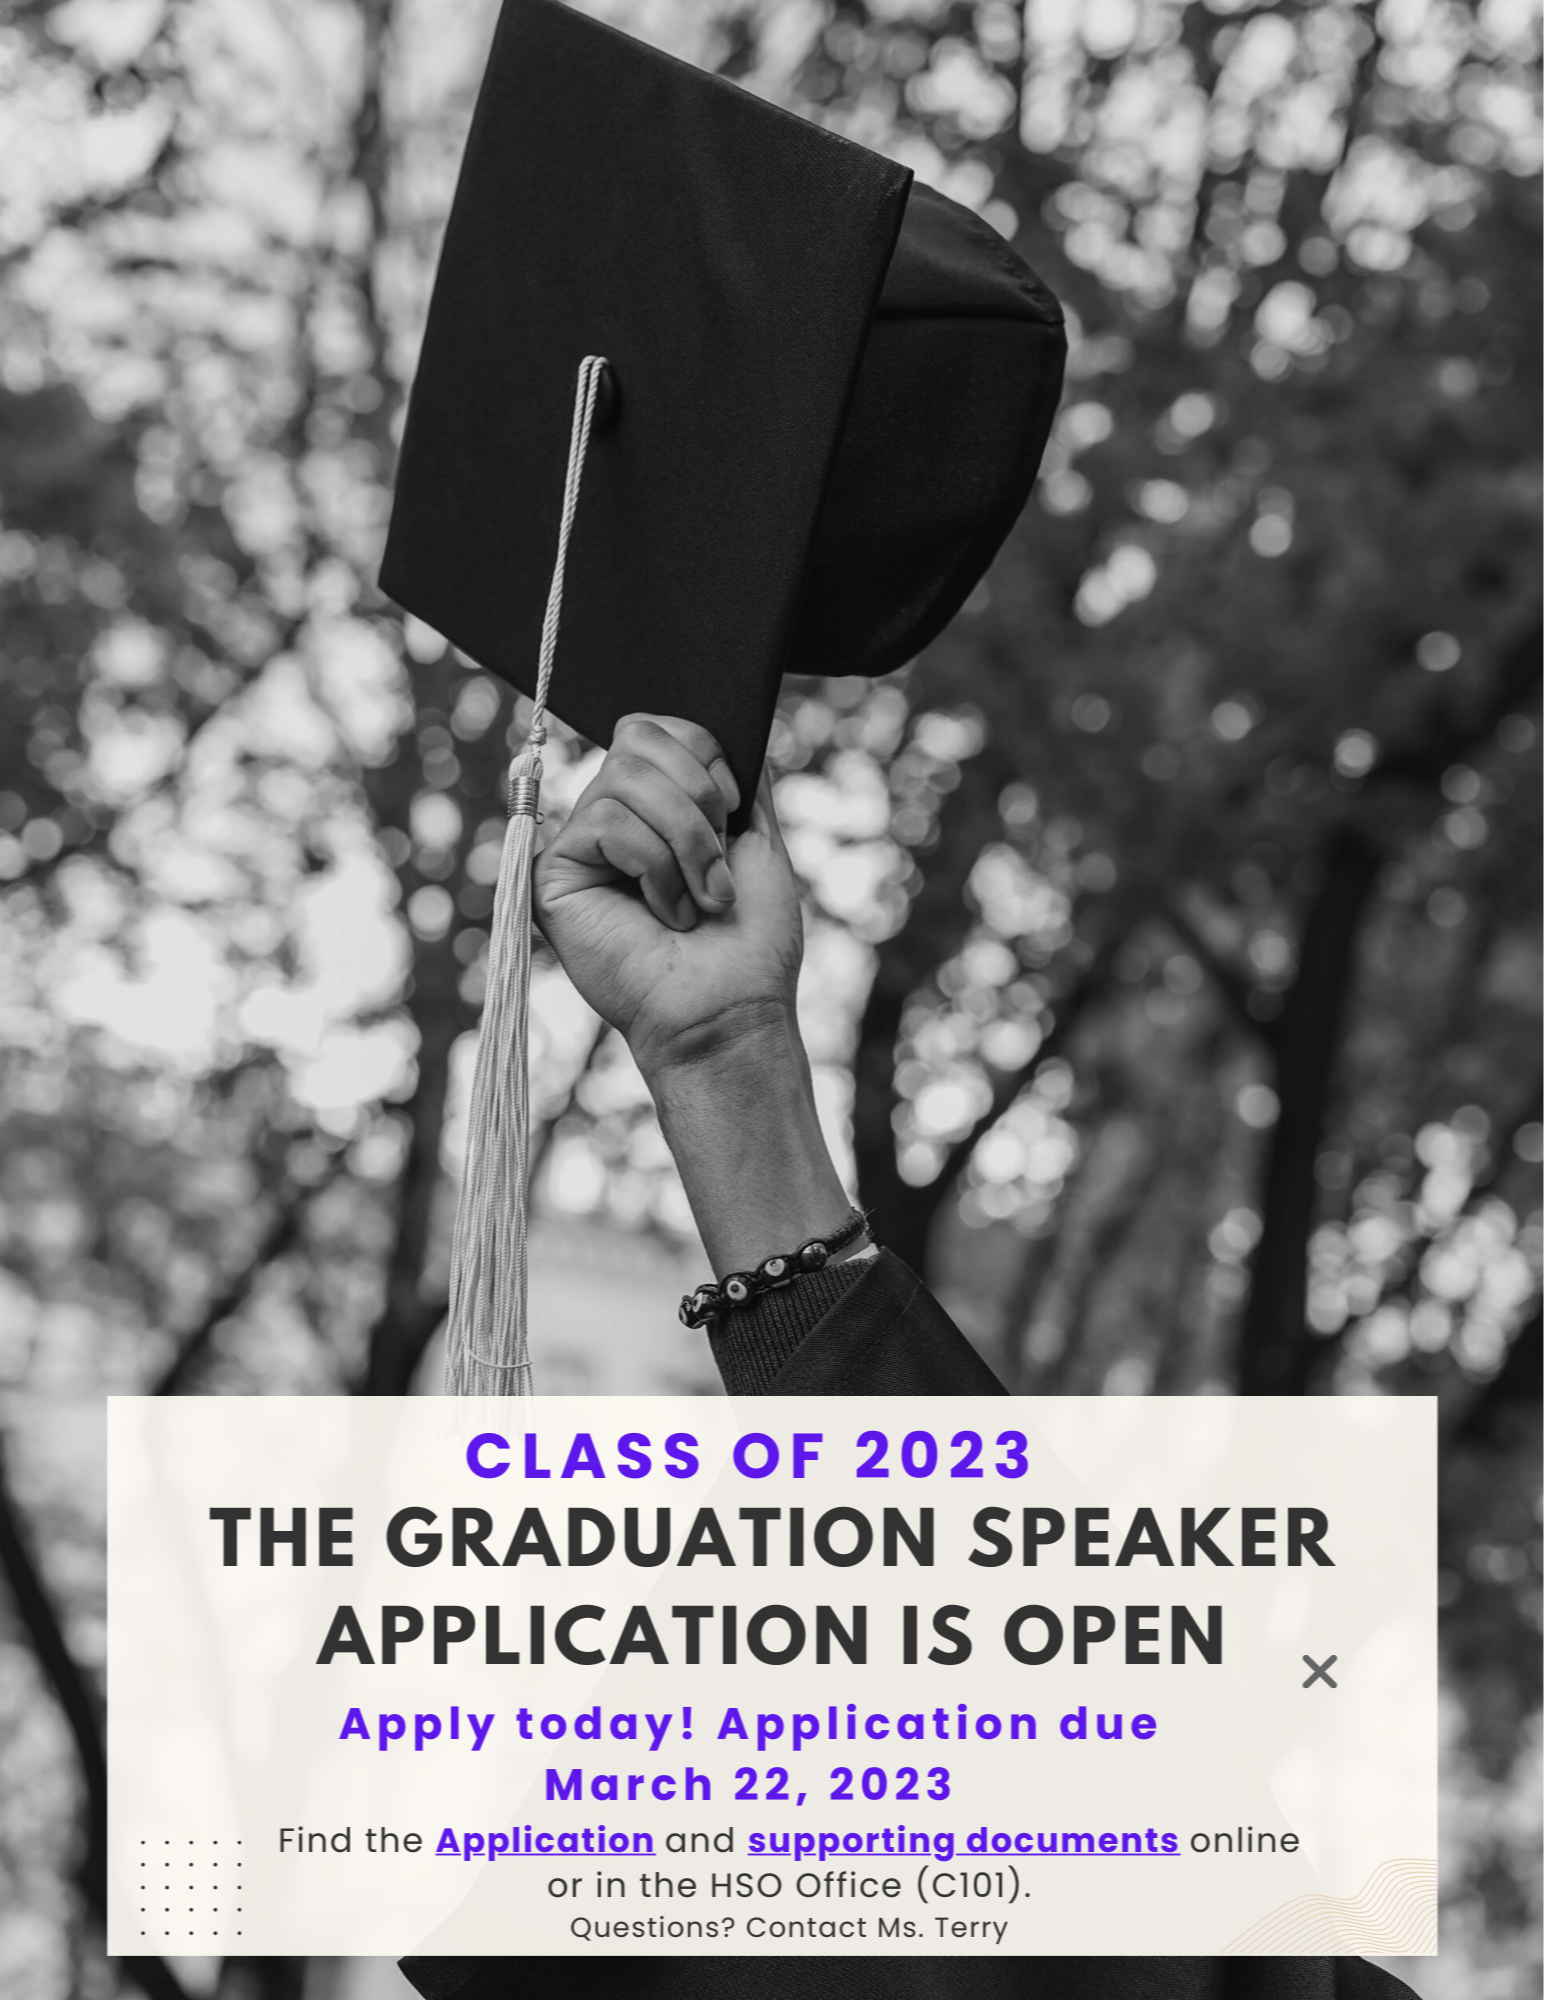 class of 2023 graduation speaker application is open, applications due March 22nd